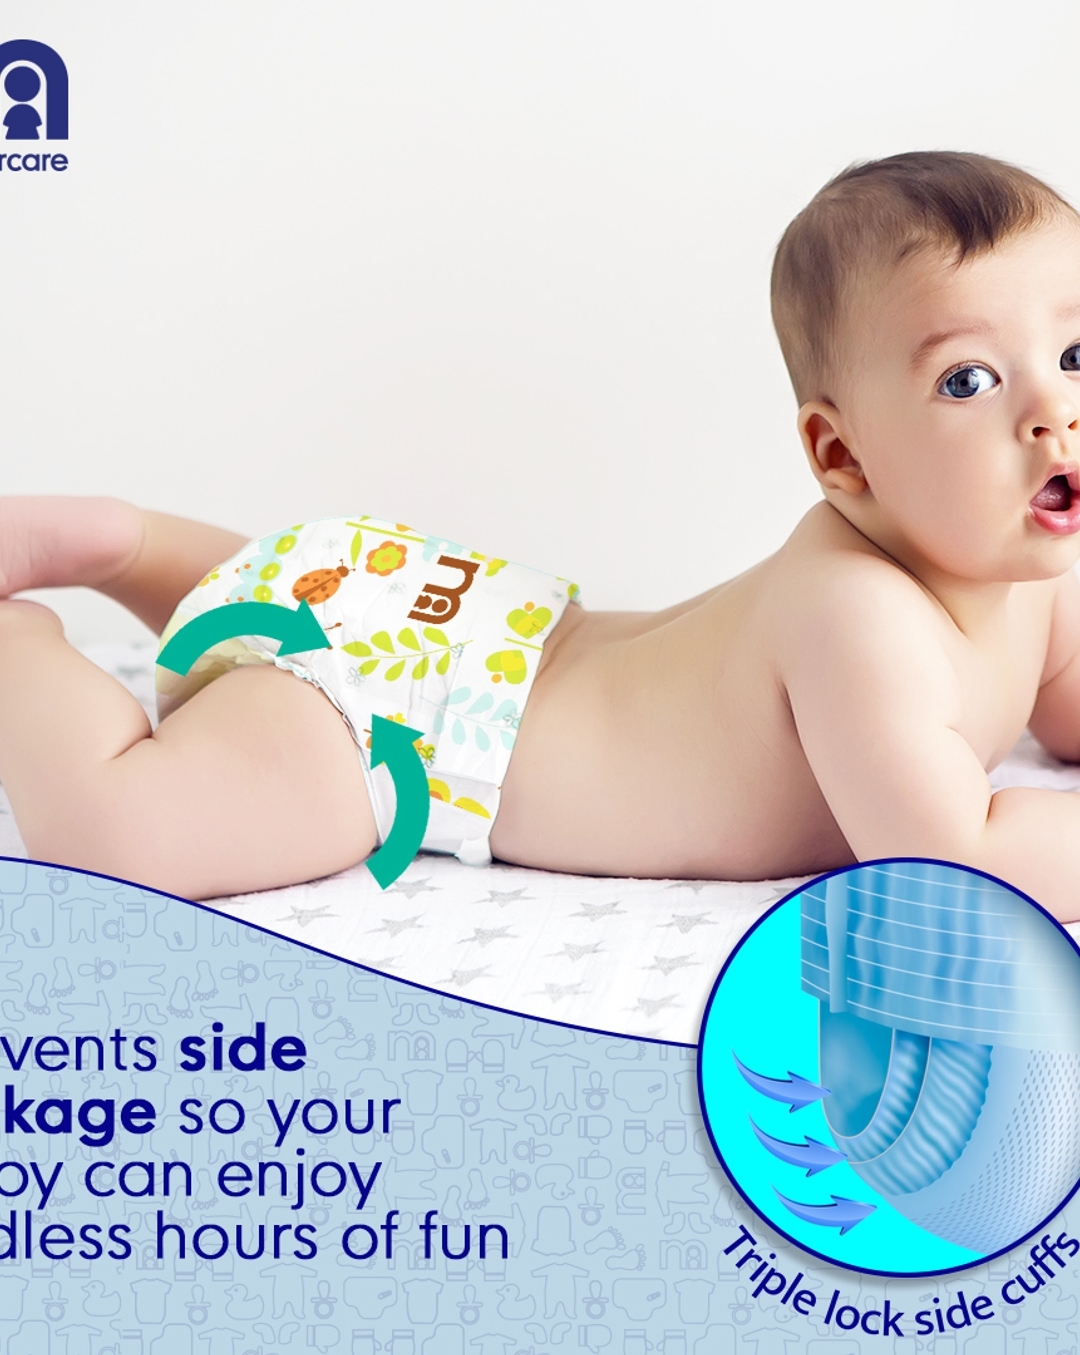 Pampers All round xxl 28 Protection Pants, Double Extra Large size baby  diapers (XXL), 28 - XXL - Buy 1 Pampers Pant Diapers | Flipkart.com